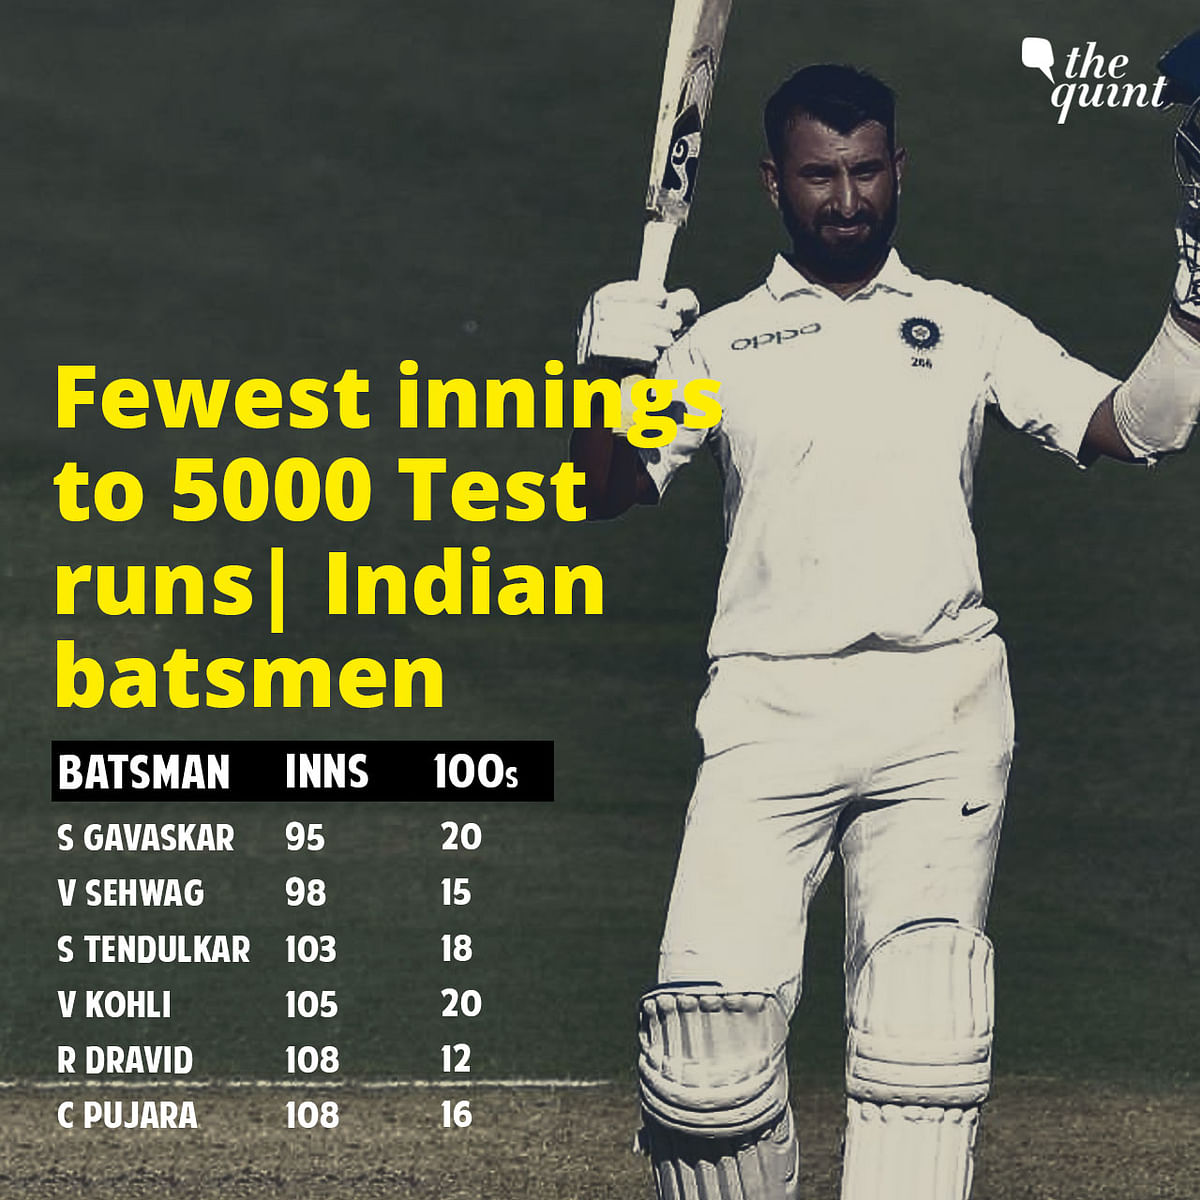 Statistical highlights from Day 1 of the Adelaide Test, with India 250/9 after opting to bat vs Australia.